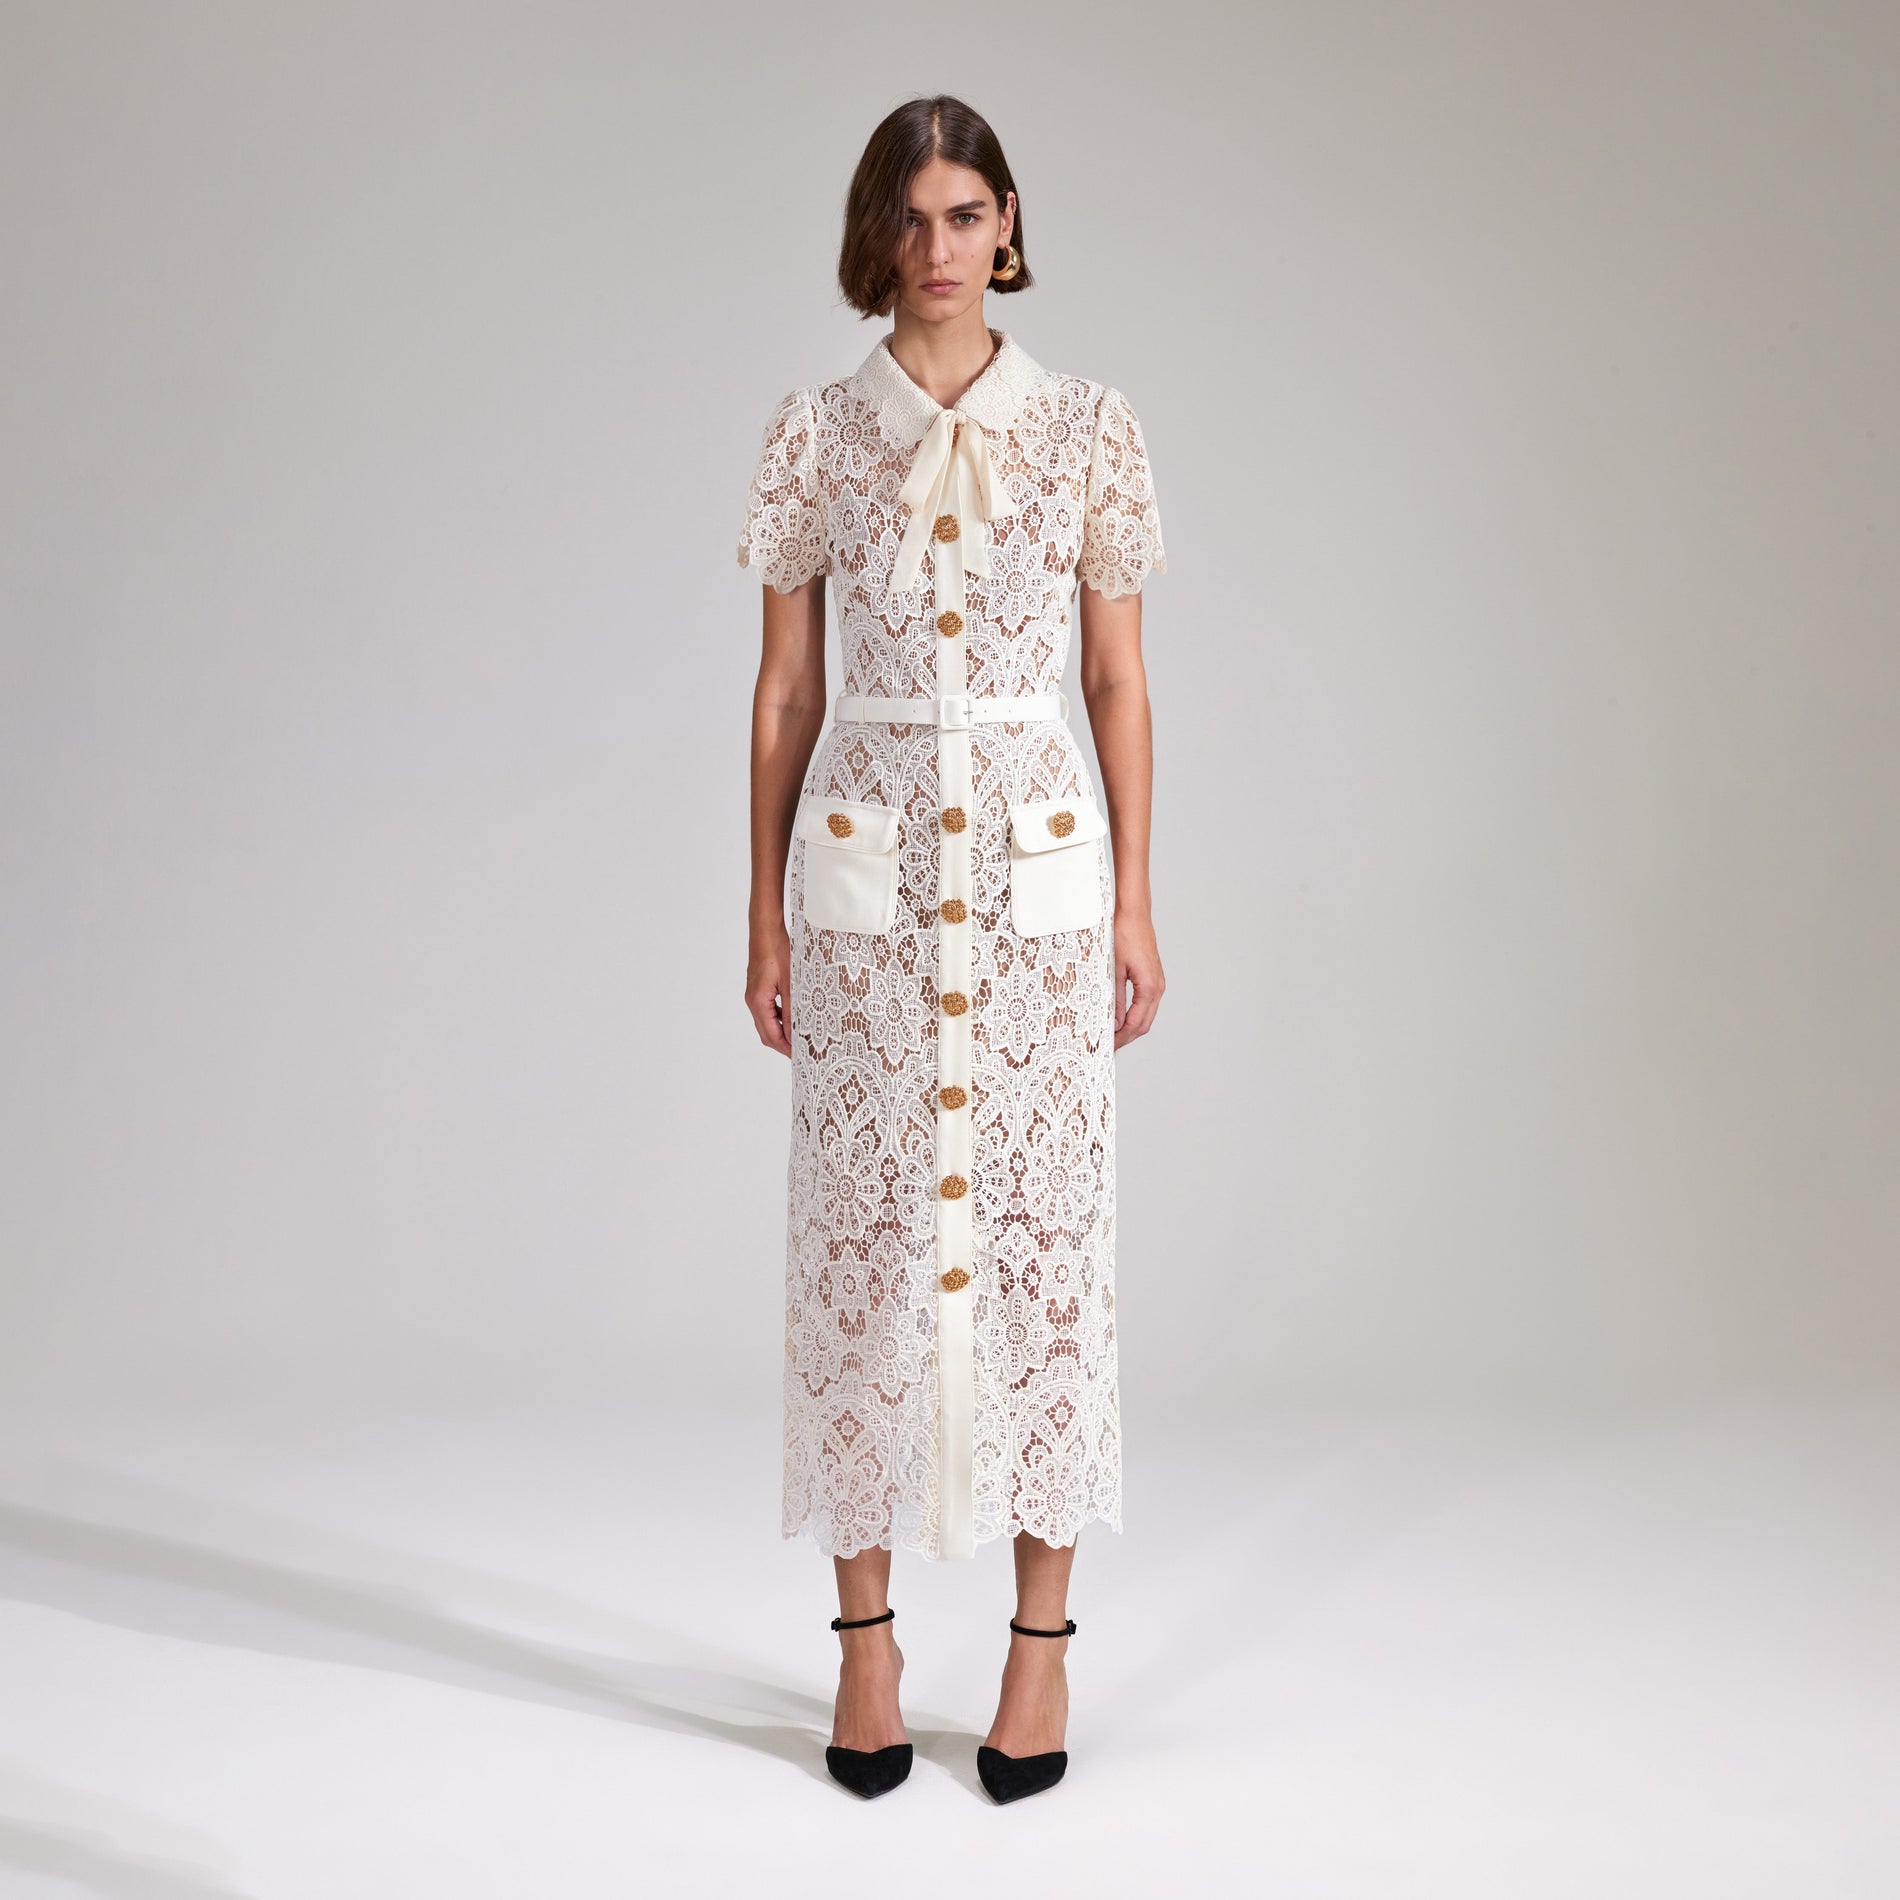 A woman wearing the Cream Floral Guipure Midi Dress